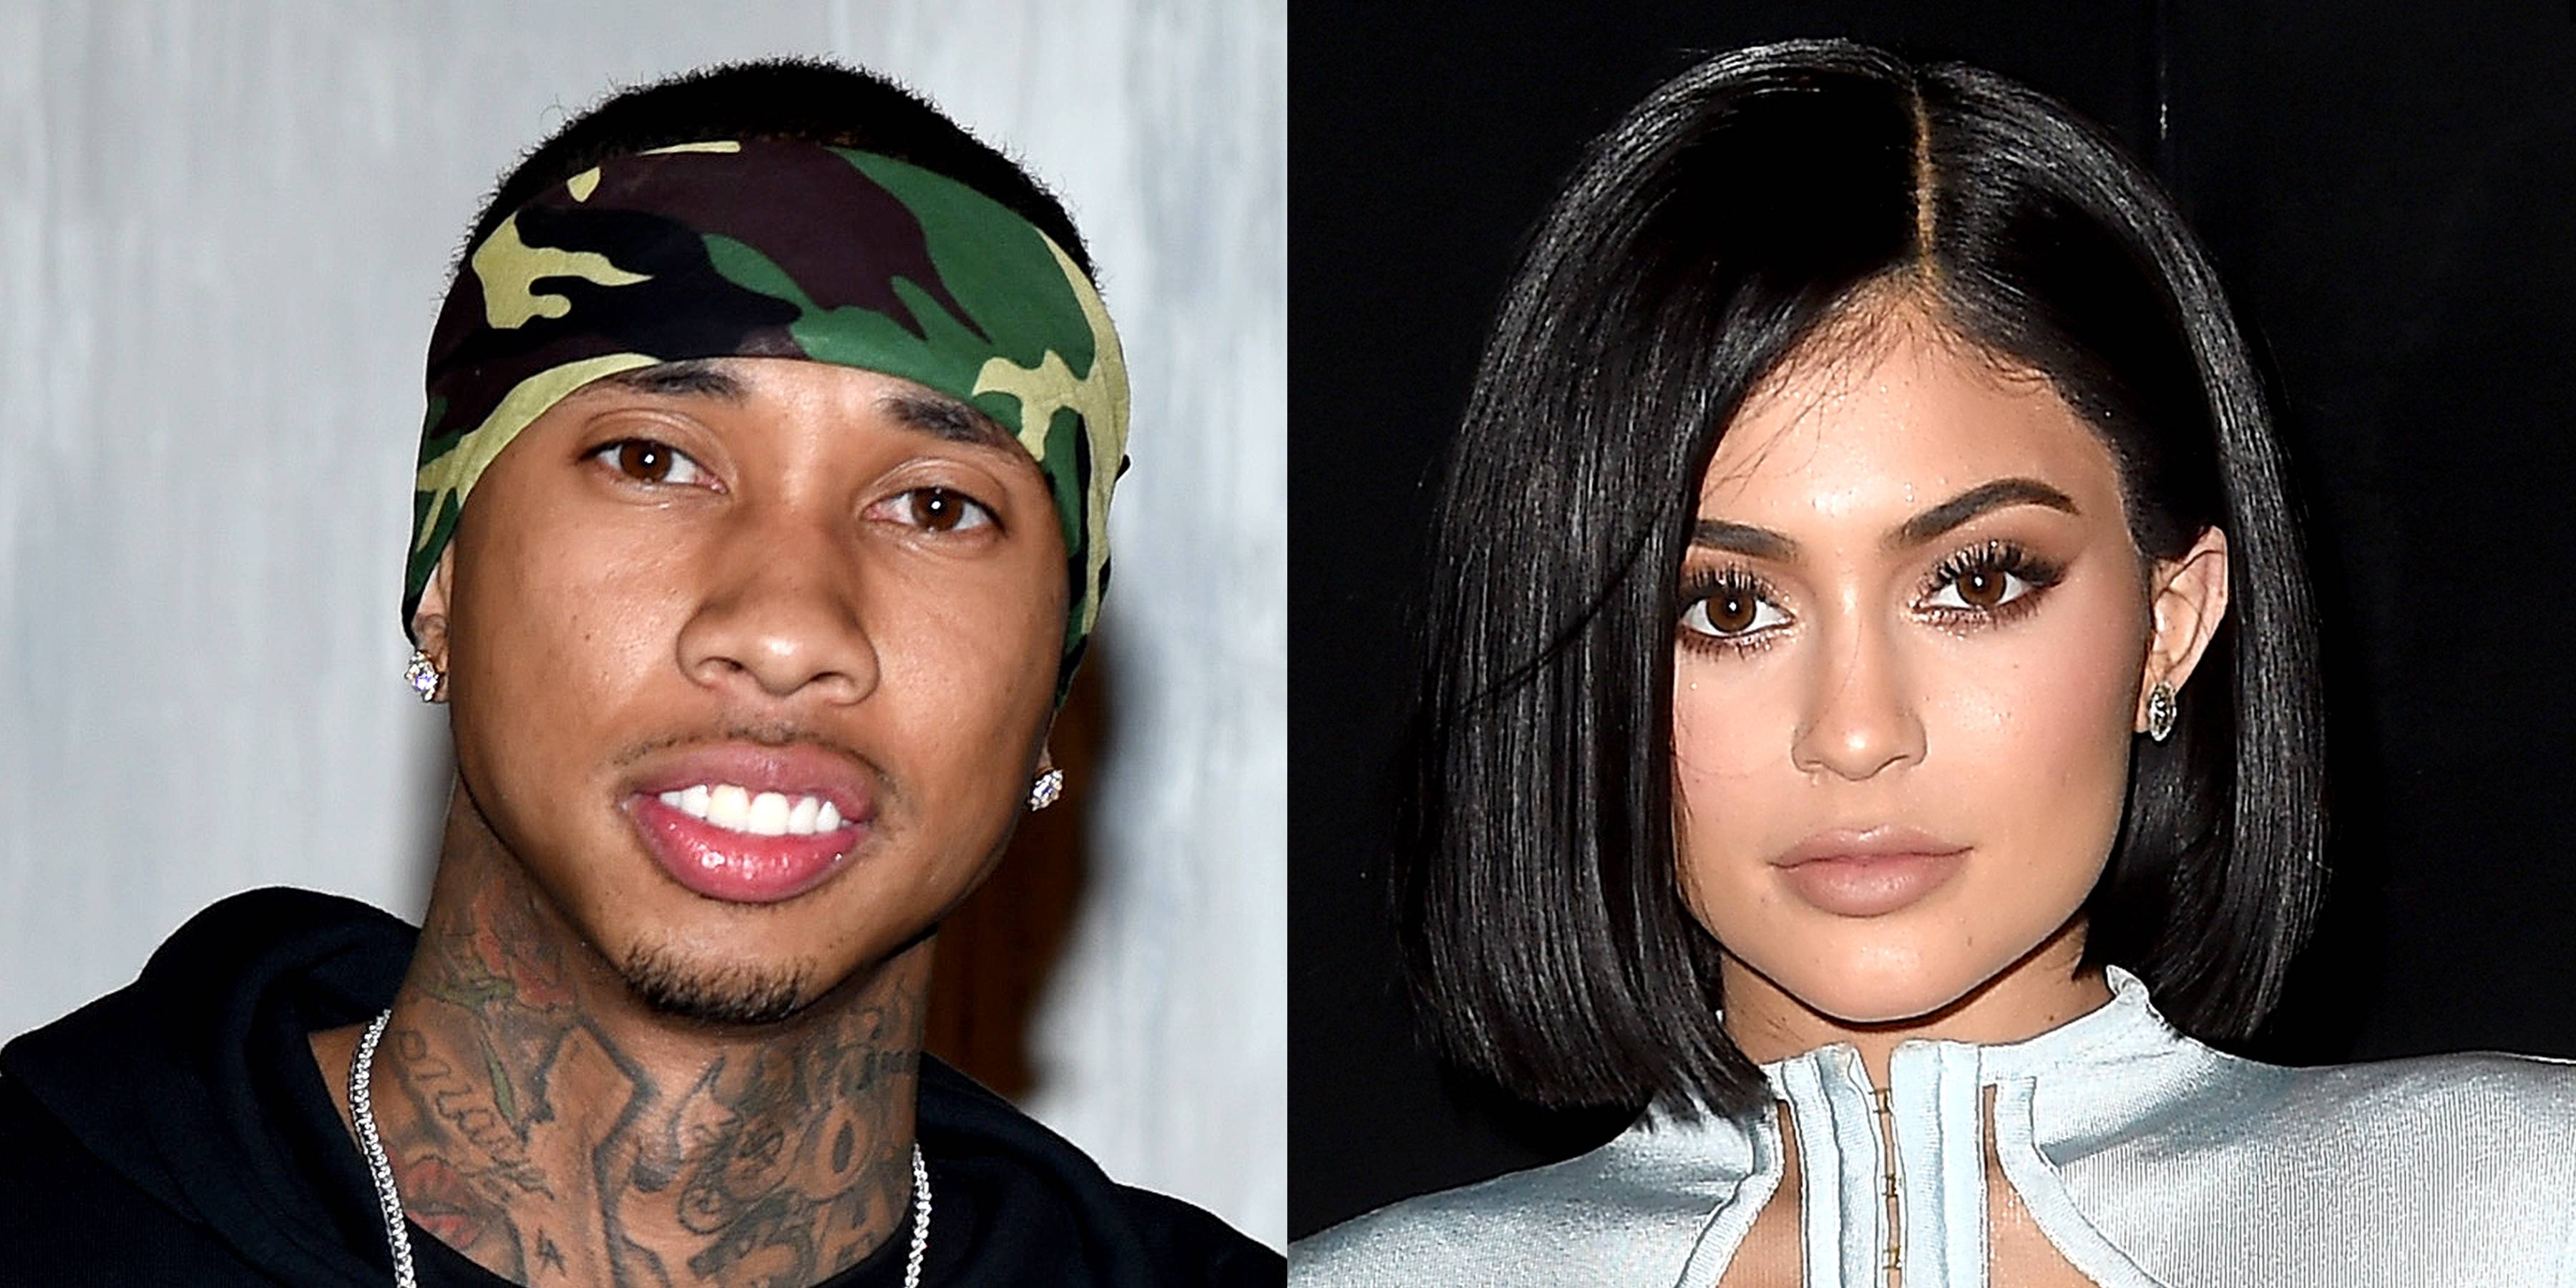 Kylie Jenner Went Through Bey's Pain Recovery Program - According to recent reports,&nbsp;Kylie Jenner is officially done mourning her relationship with Tyga. She's apparently moved on to dating&nbsp;PartyNextDoor. We wonder if this love fest will turn out as beautiful as Blac Chyna and Rob Kardashian. Only time will tell how it all unfolds.(Photos from Left: Dave Kotinsky/Getty Images, Nicholas Hunt/Getty Images for Balmain)&nbsp;